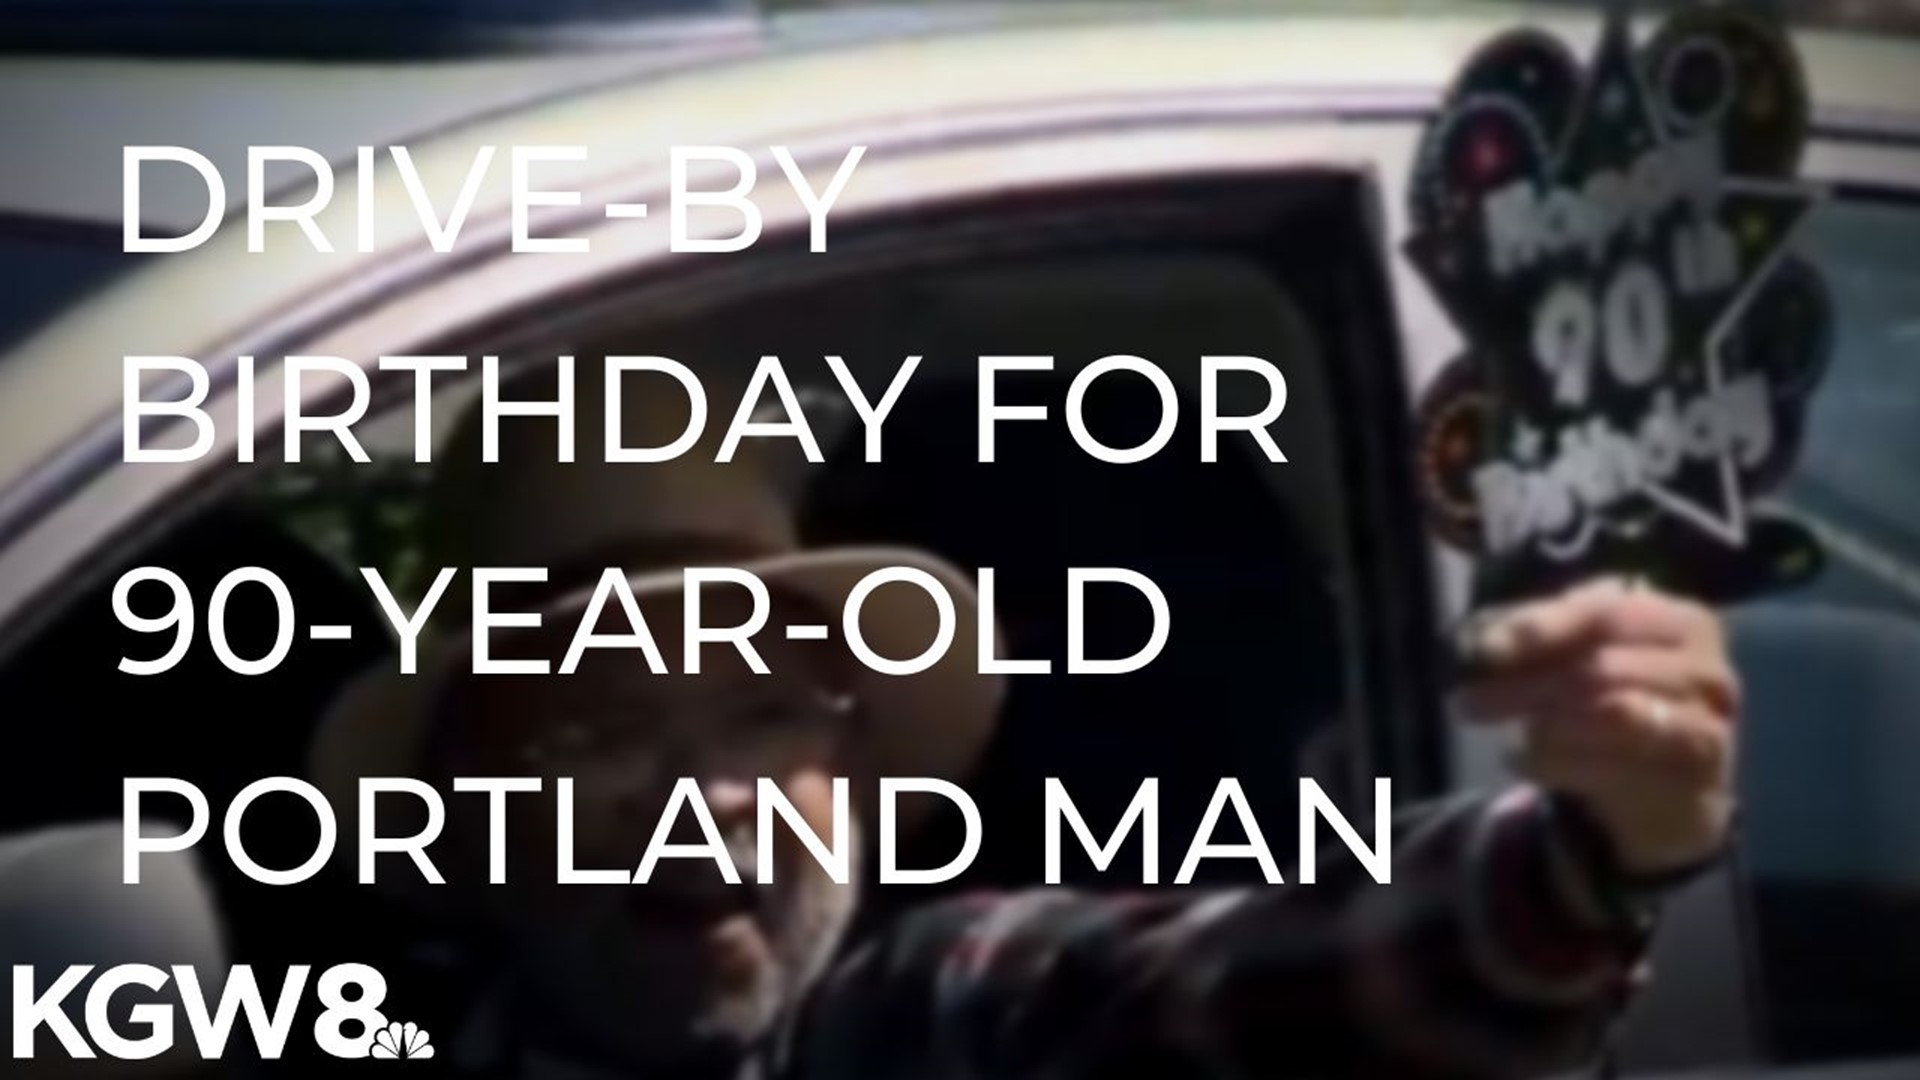 A Portland man celebrated his 90th birthday with a drive-by party.